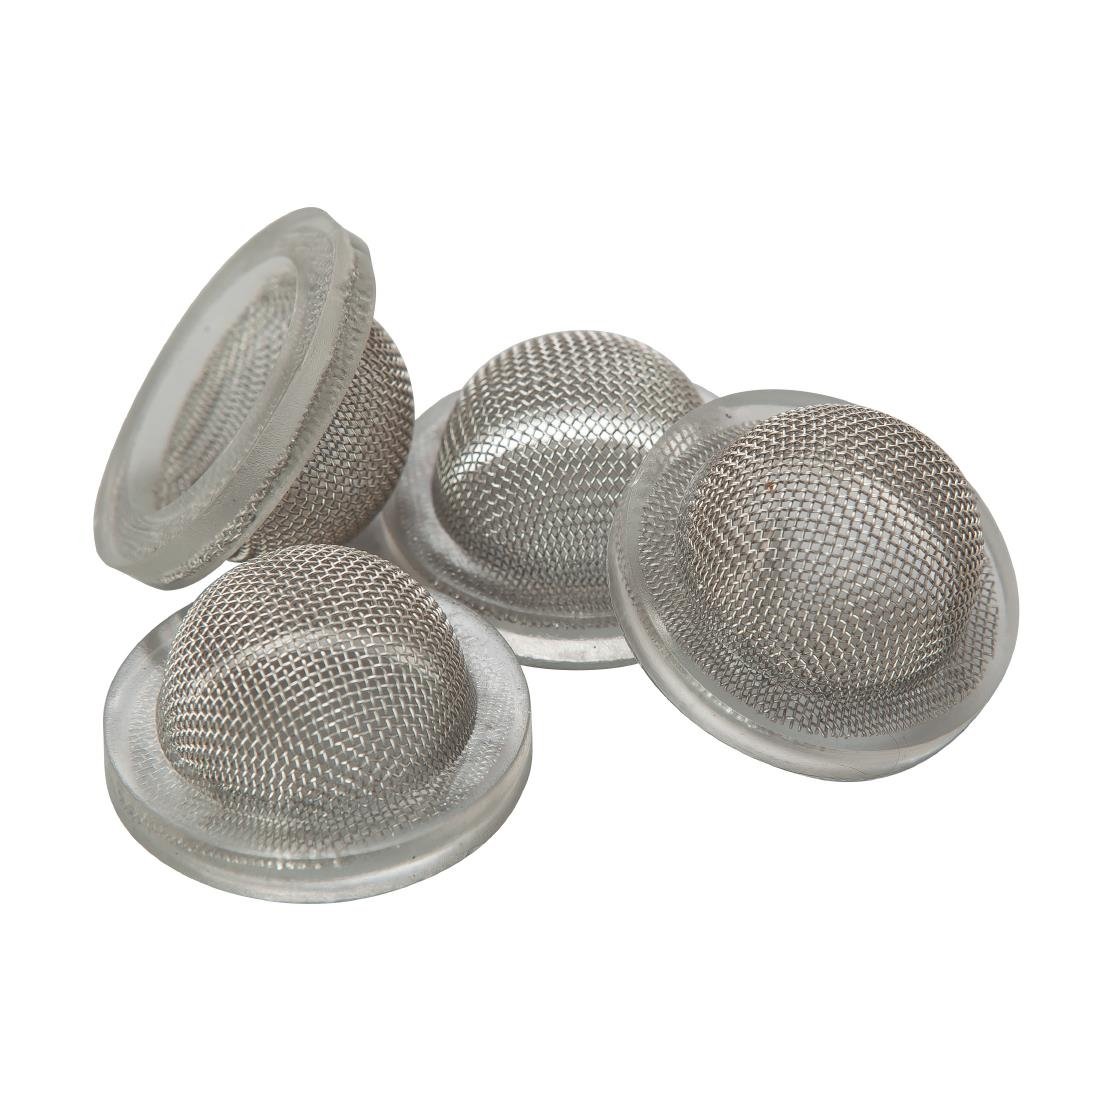 Beaumont Hop Strainer 19mm Pack of 100 (CZ515)